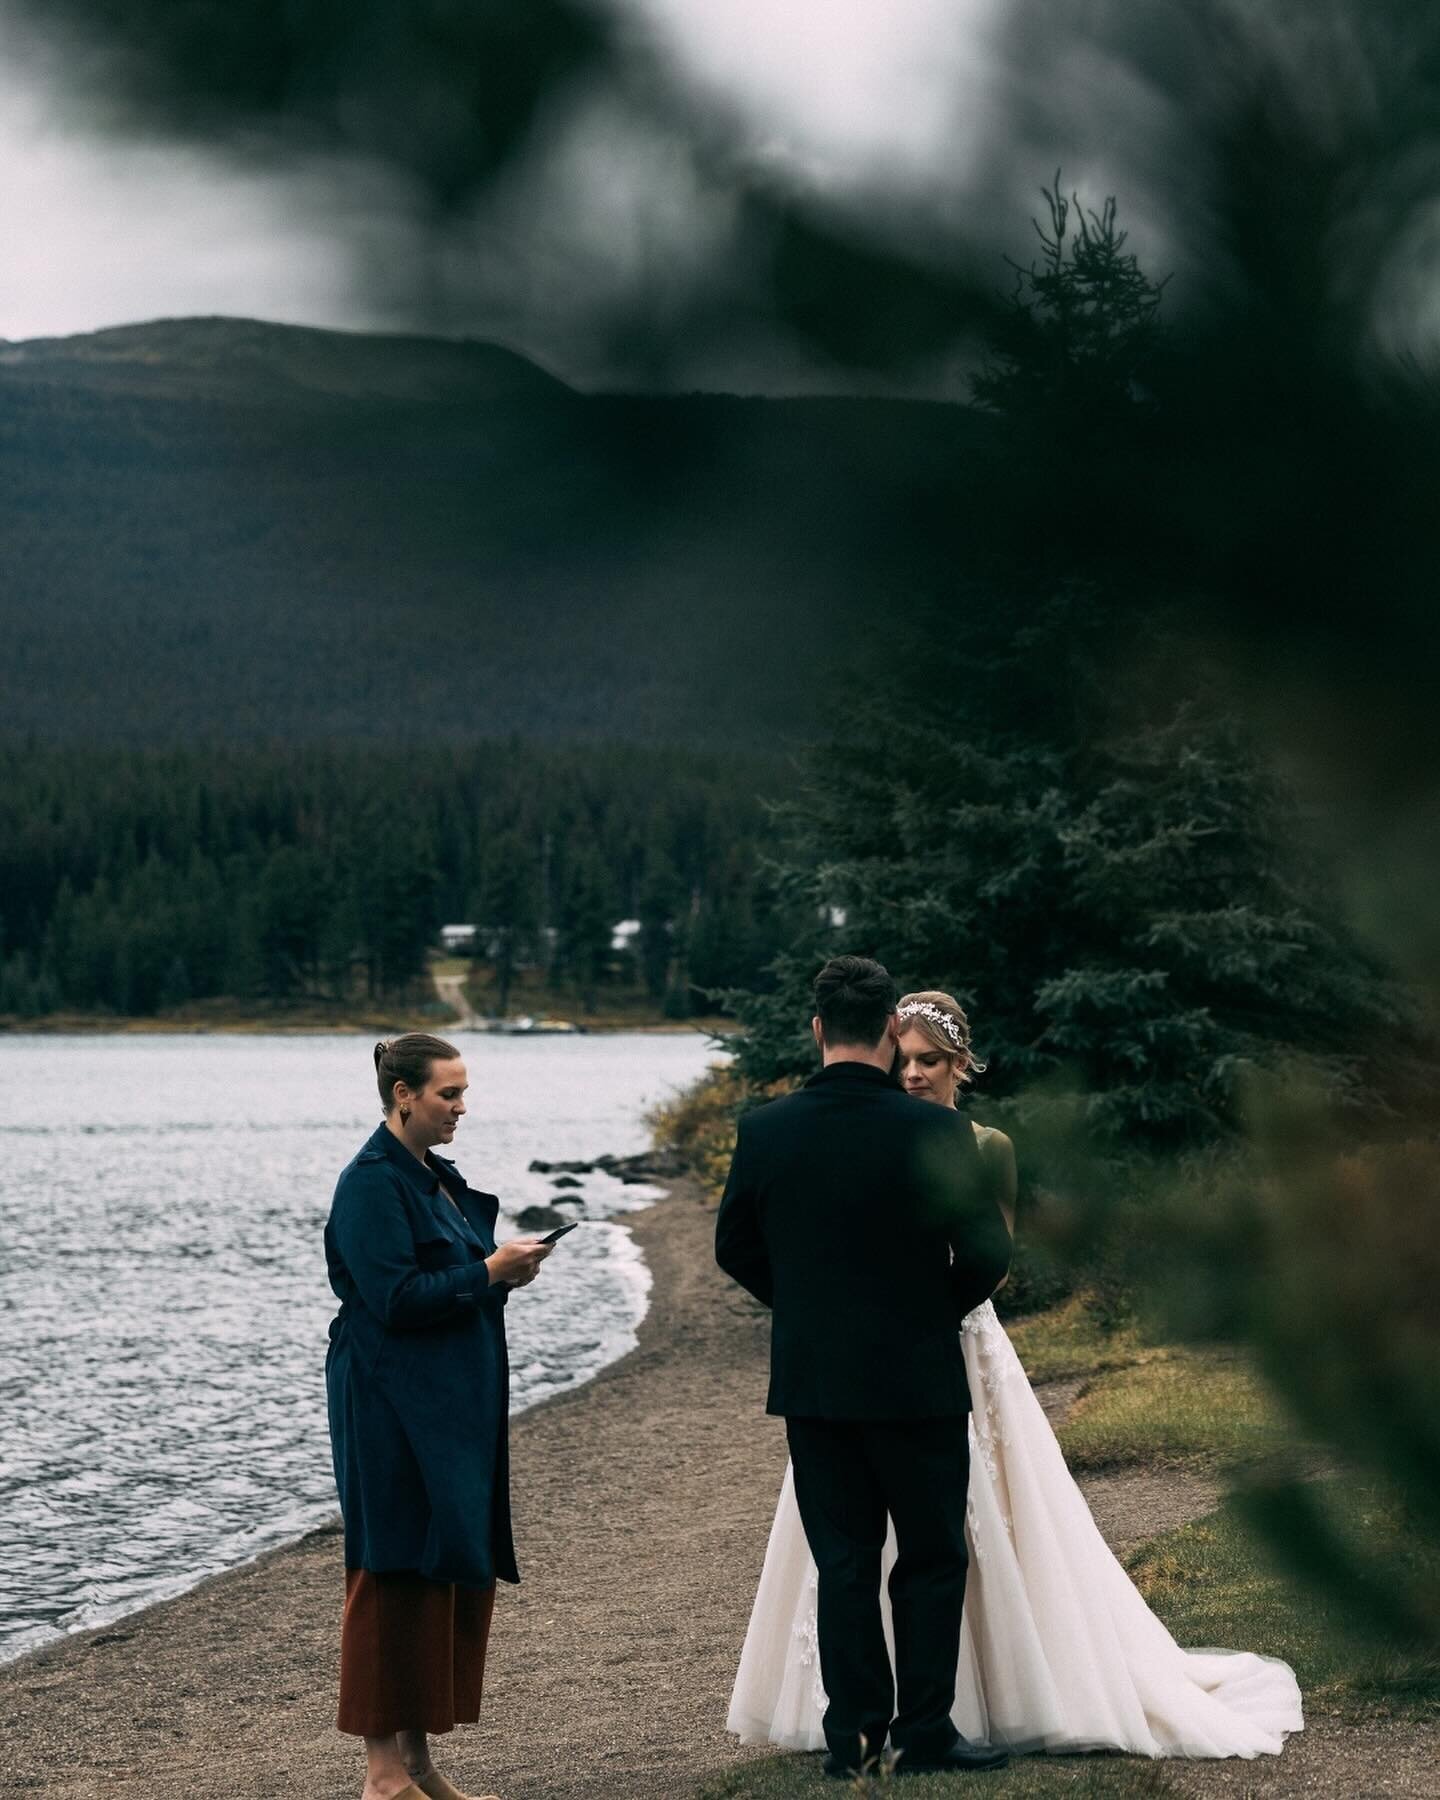 Elopements, often celebrated as intimate affairs, carry a unique charm that transcends the notion that they are somehow less significant than traditional weddings. In fact, elopements embody the essence of authenticity and focus on the core connectio